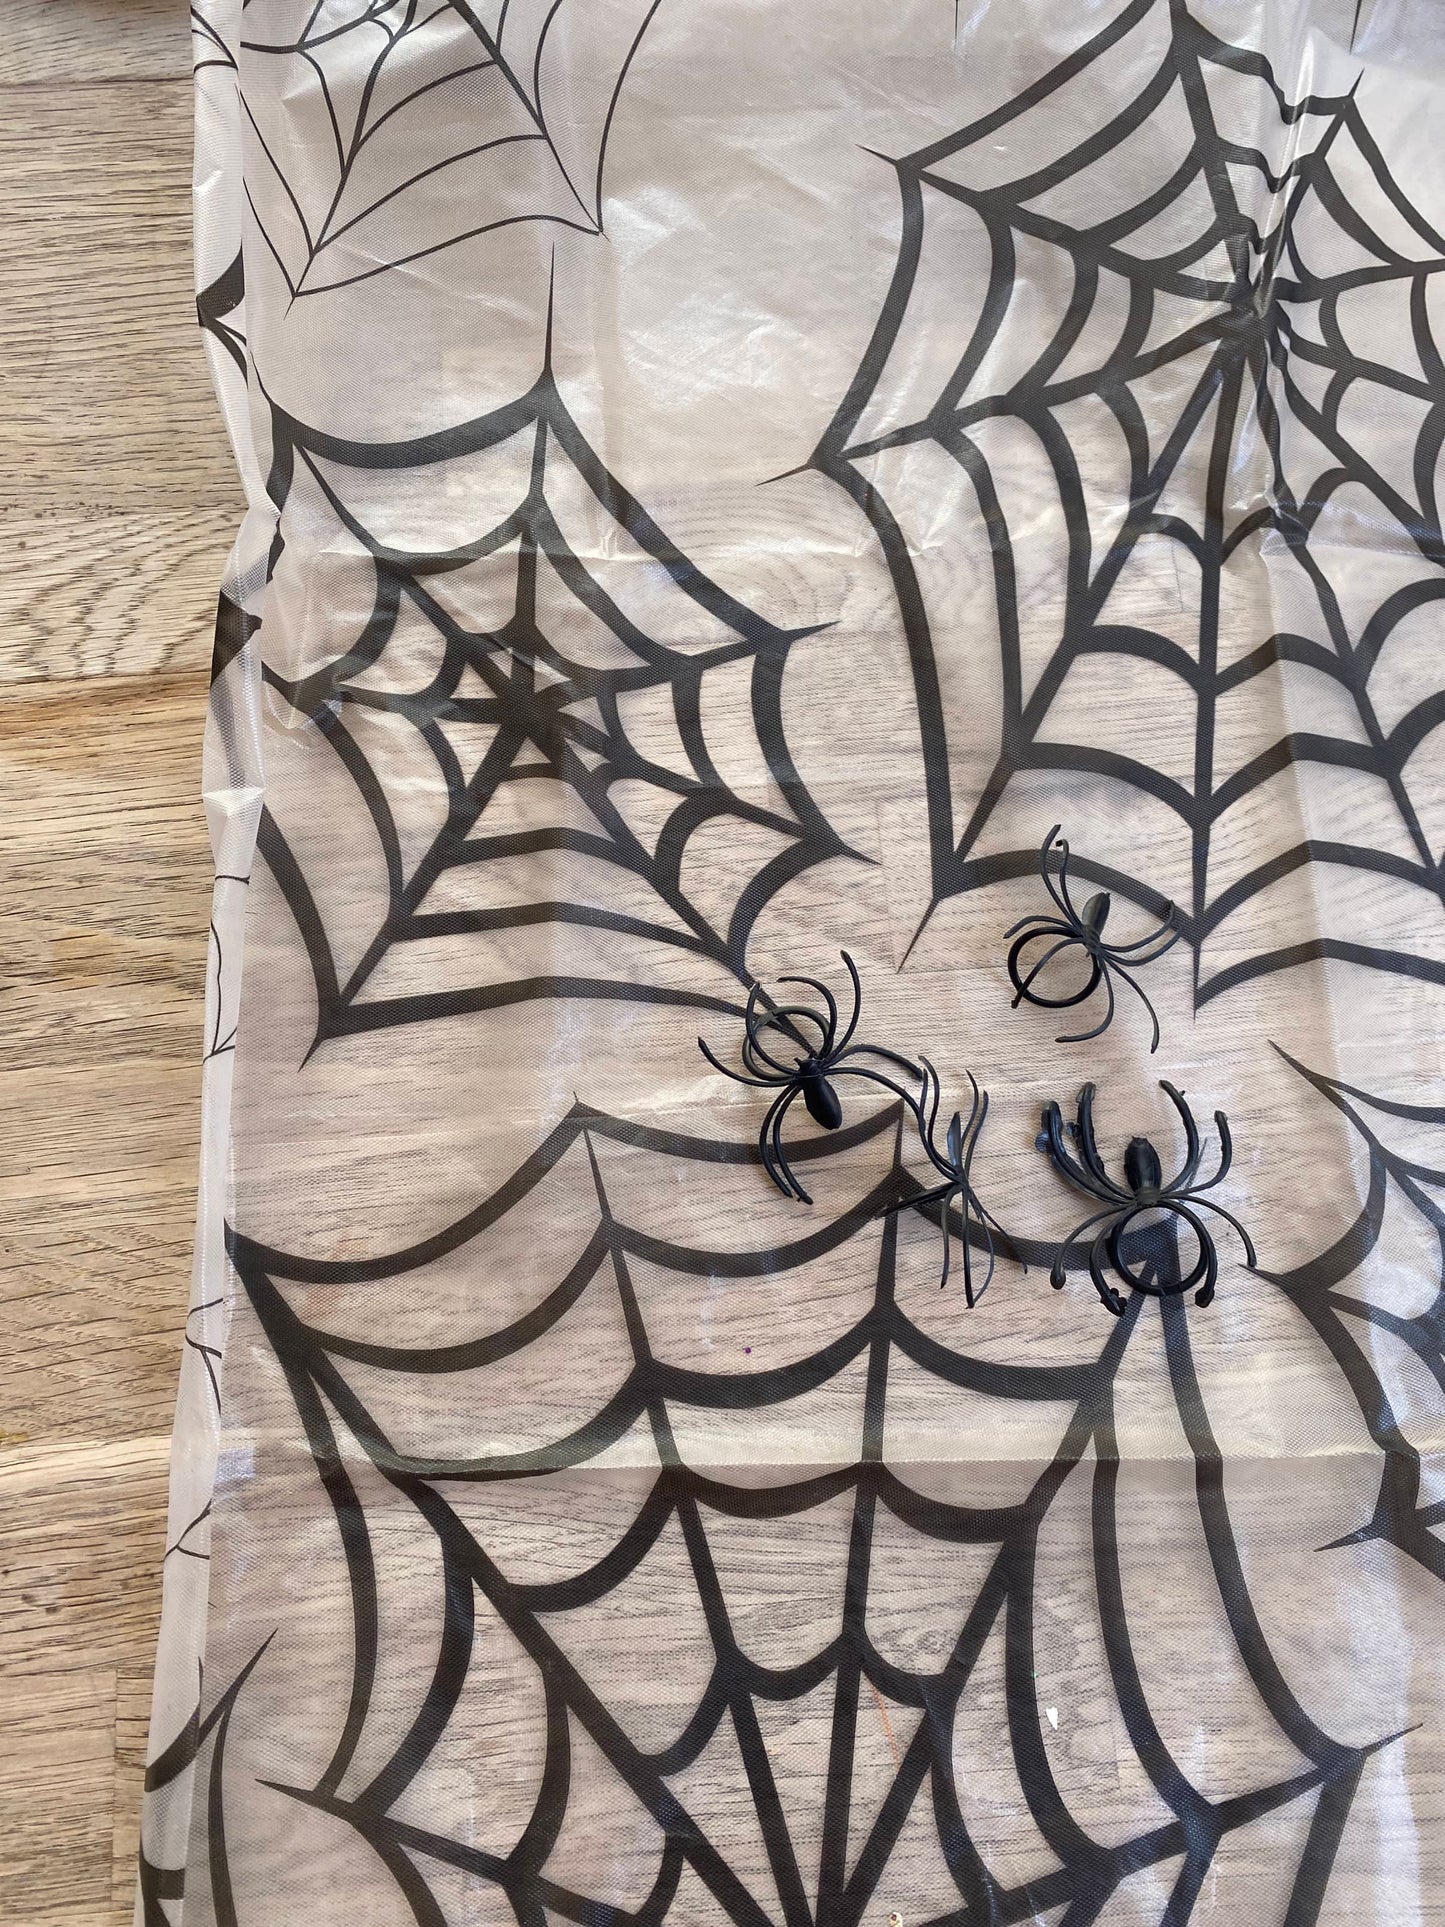 I'm Trying to Love Spiders - Book + Spider Rings + Plastic Table Runner